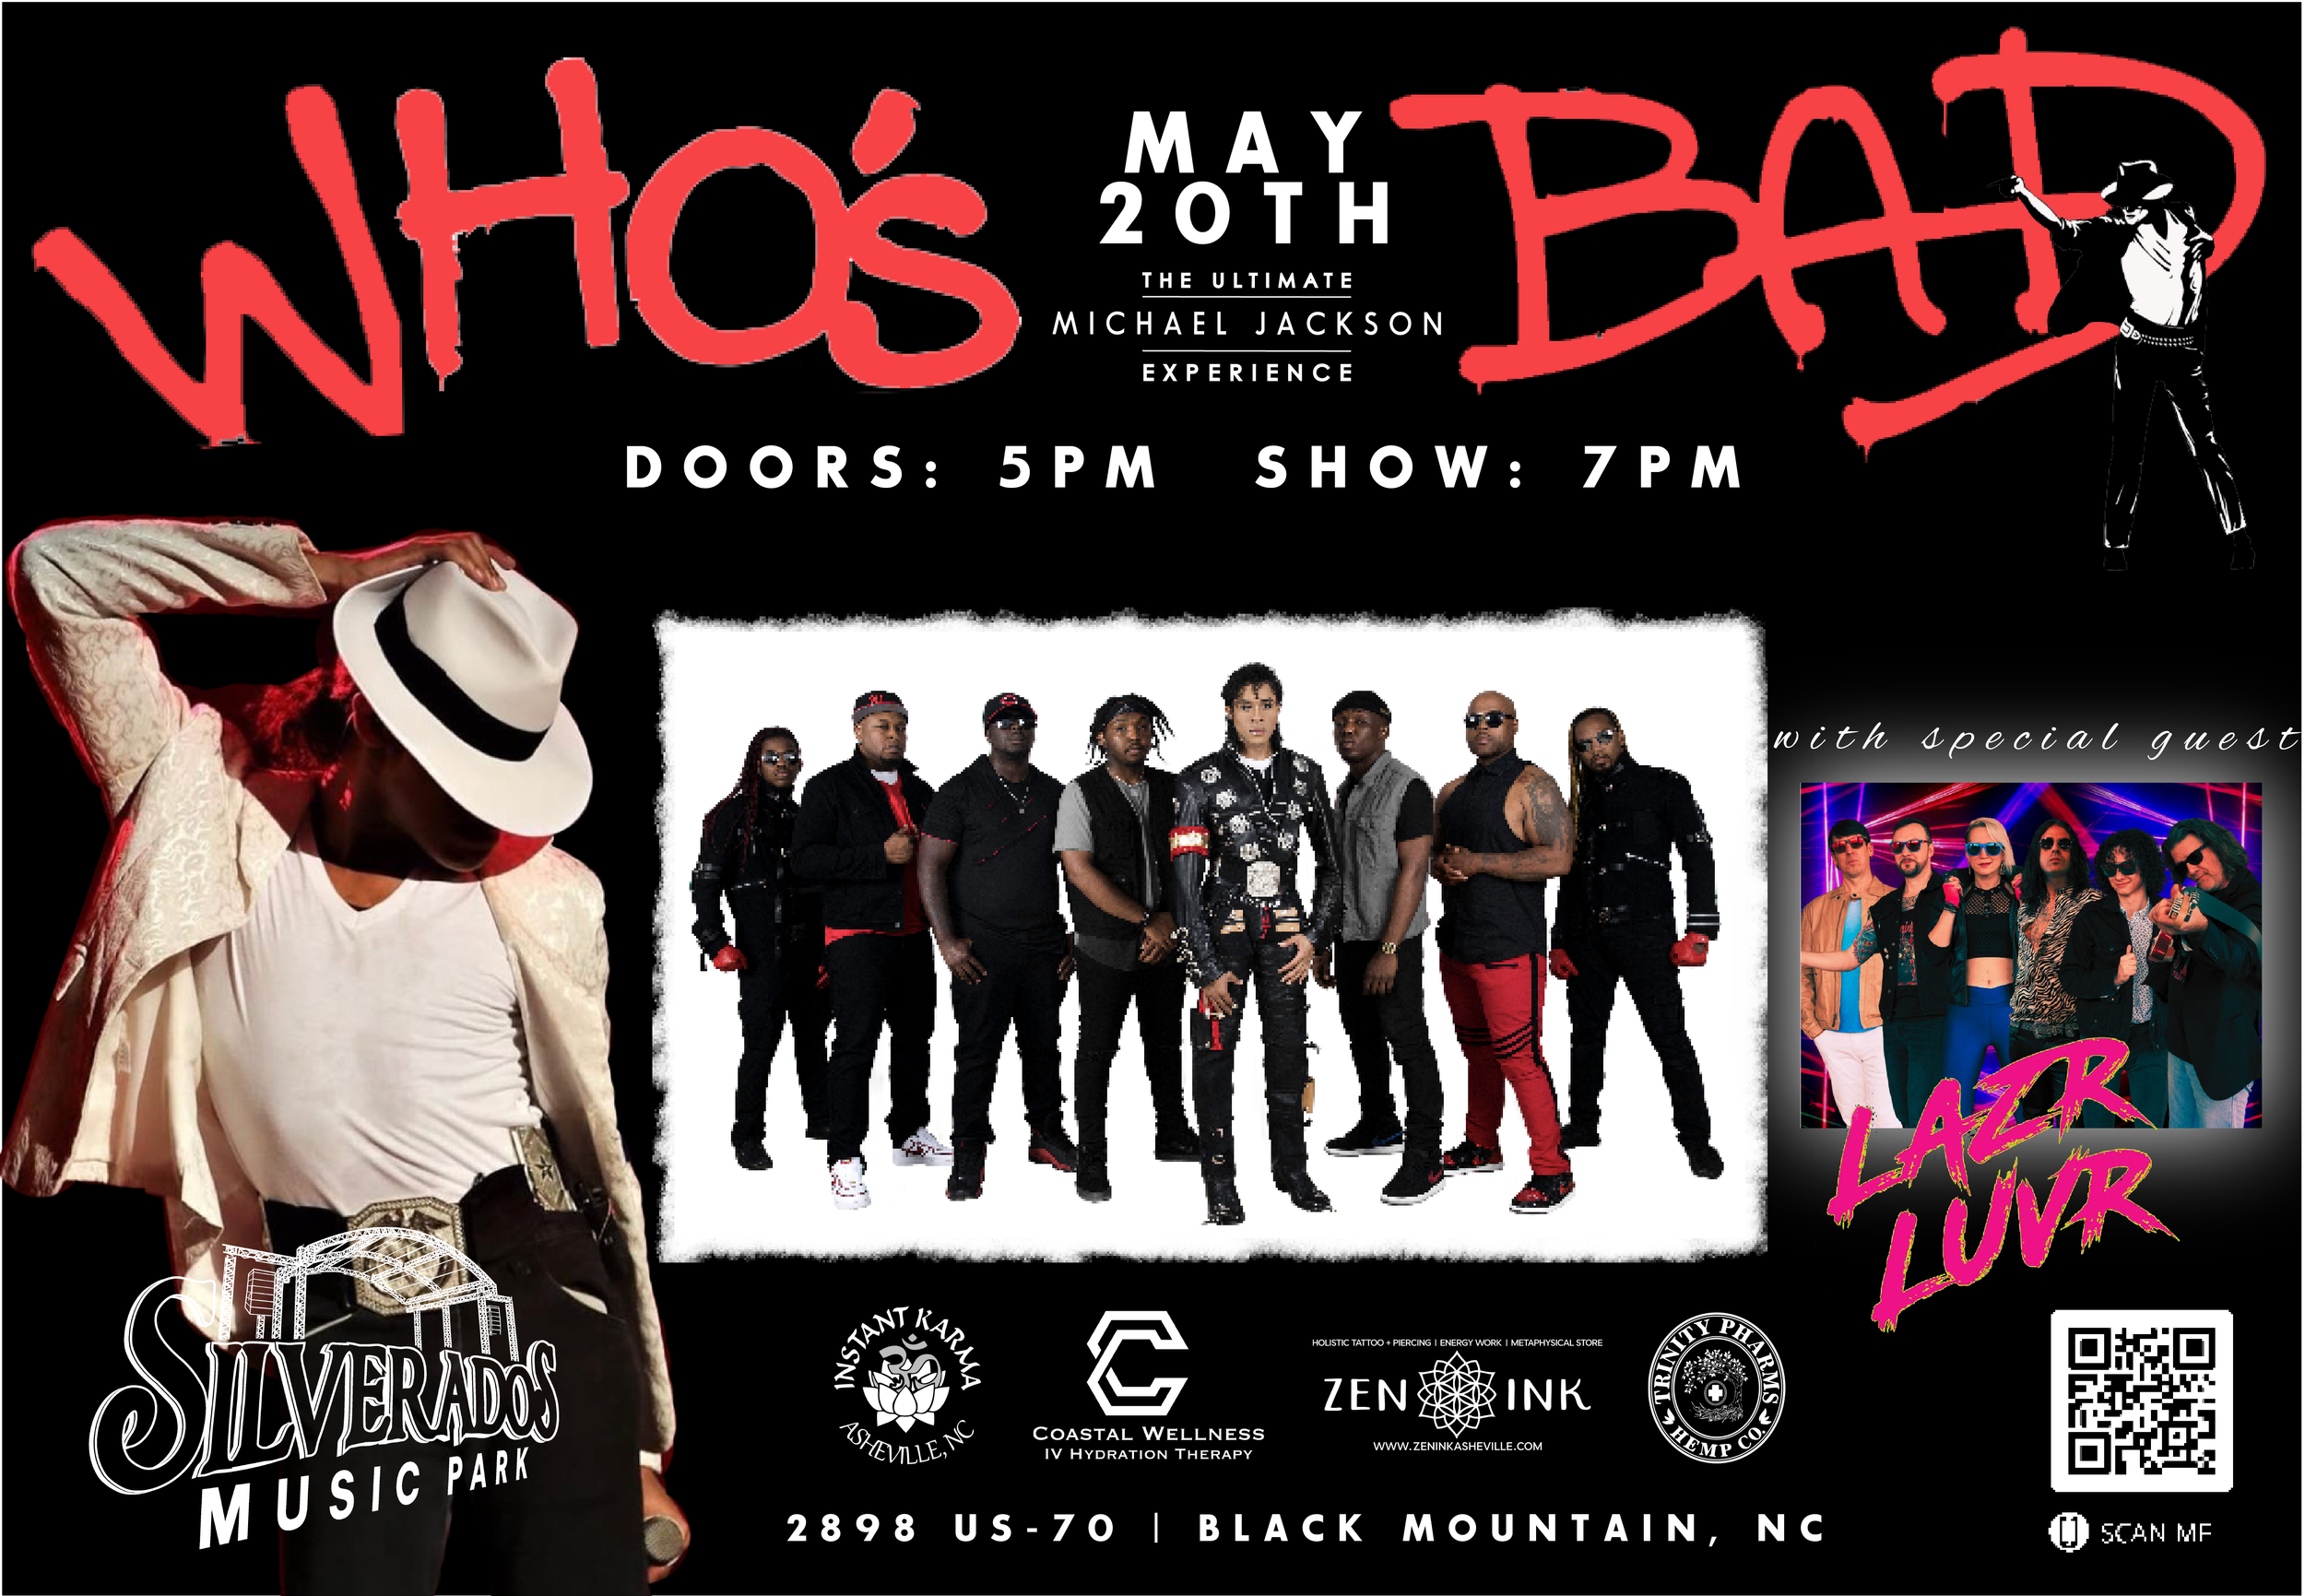 WHO'S BAD - The Ultimate Michael Jackson Experience w/ Special Guest LAZR  LUVR — Silverados